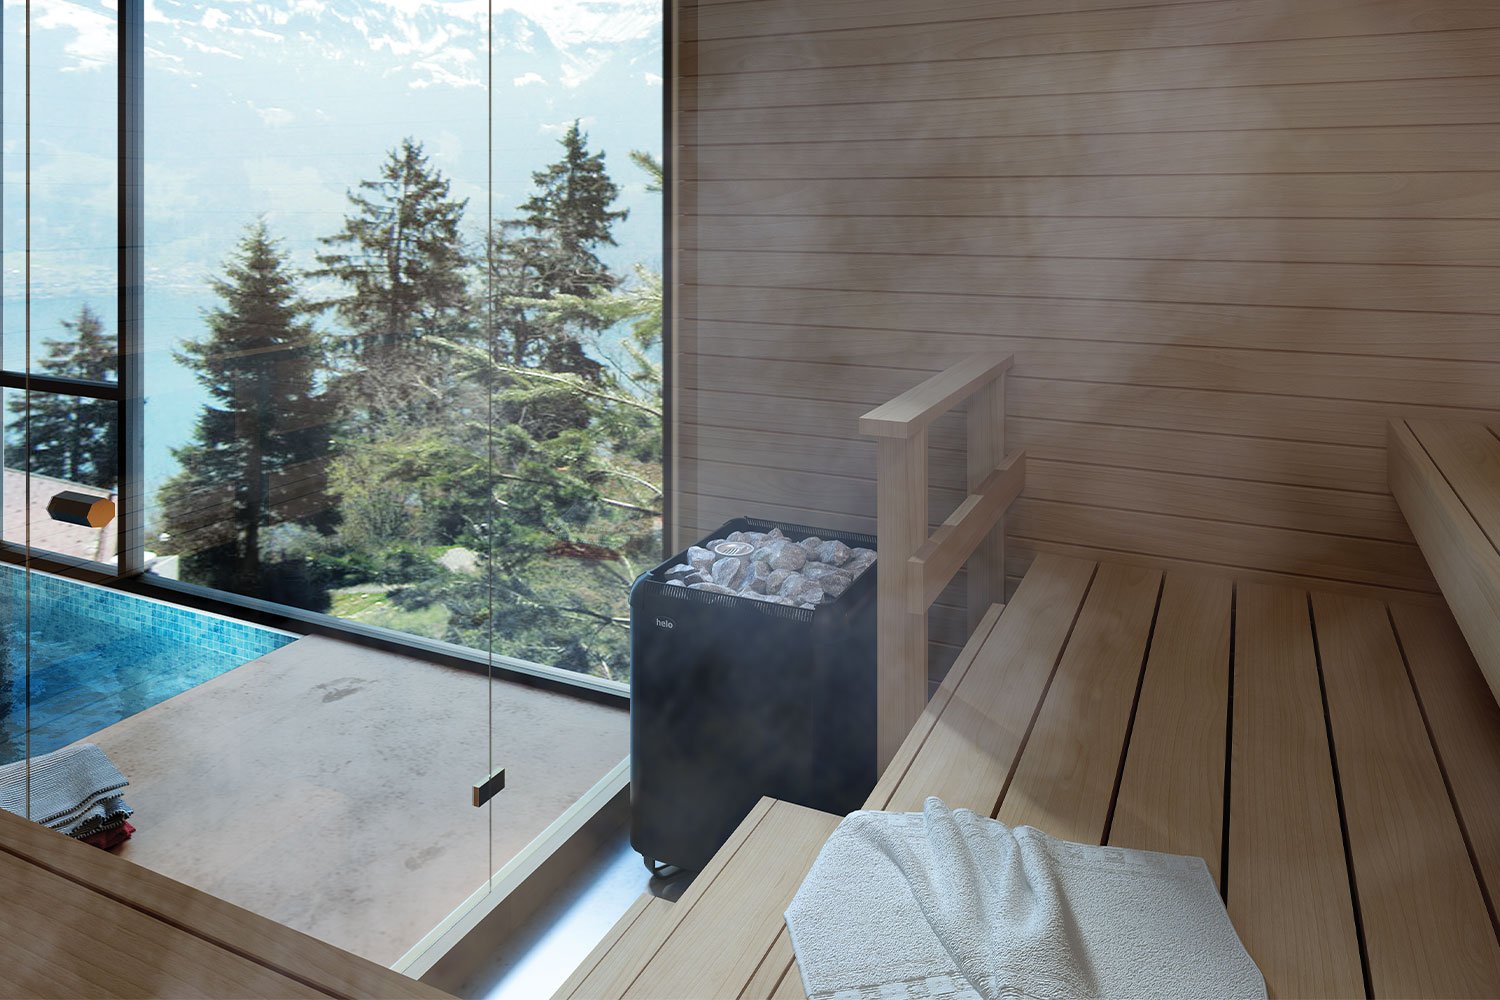 Electric sauna heaters from Helo